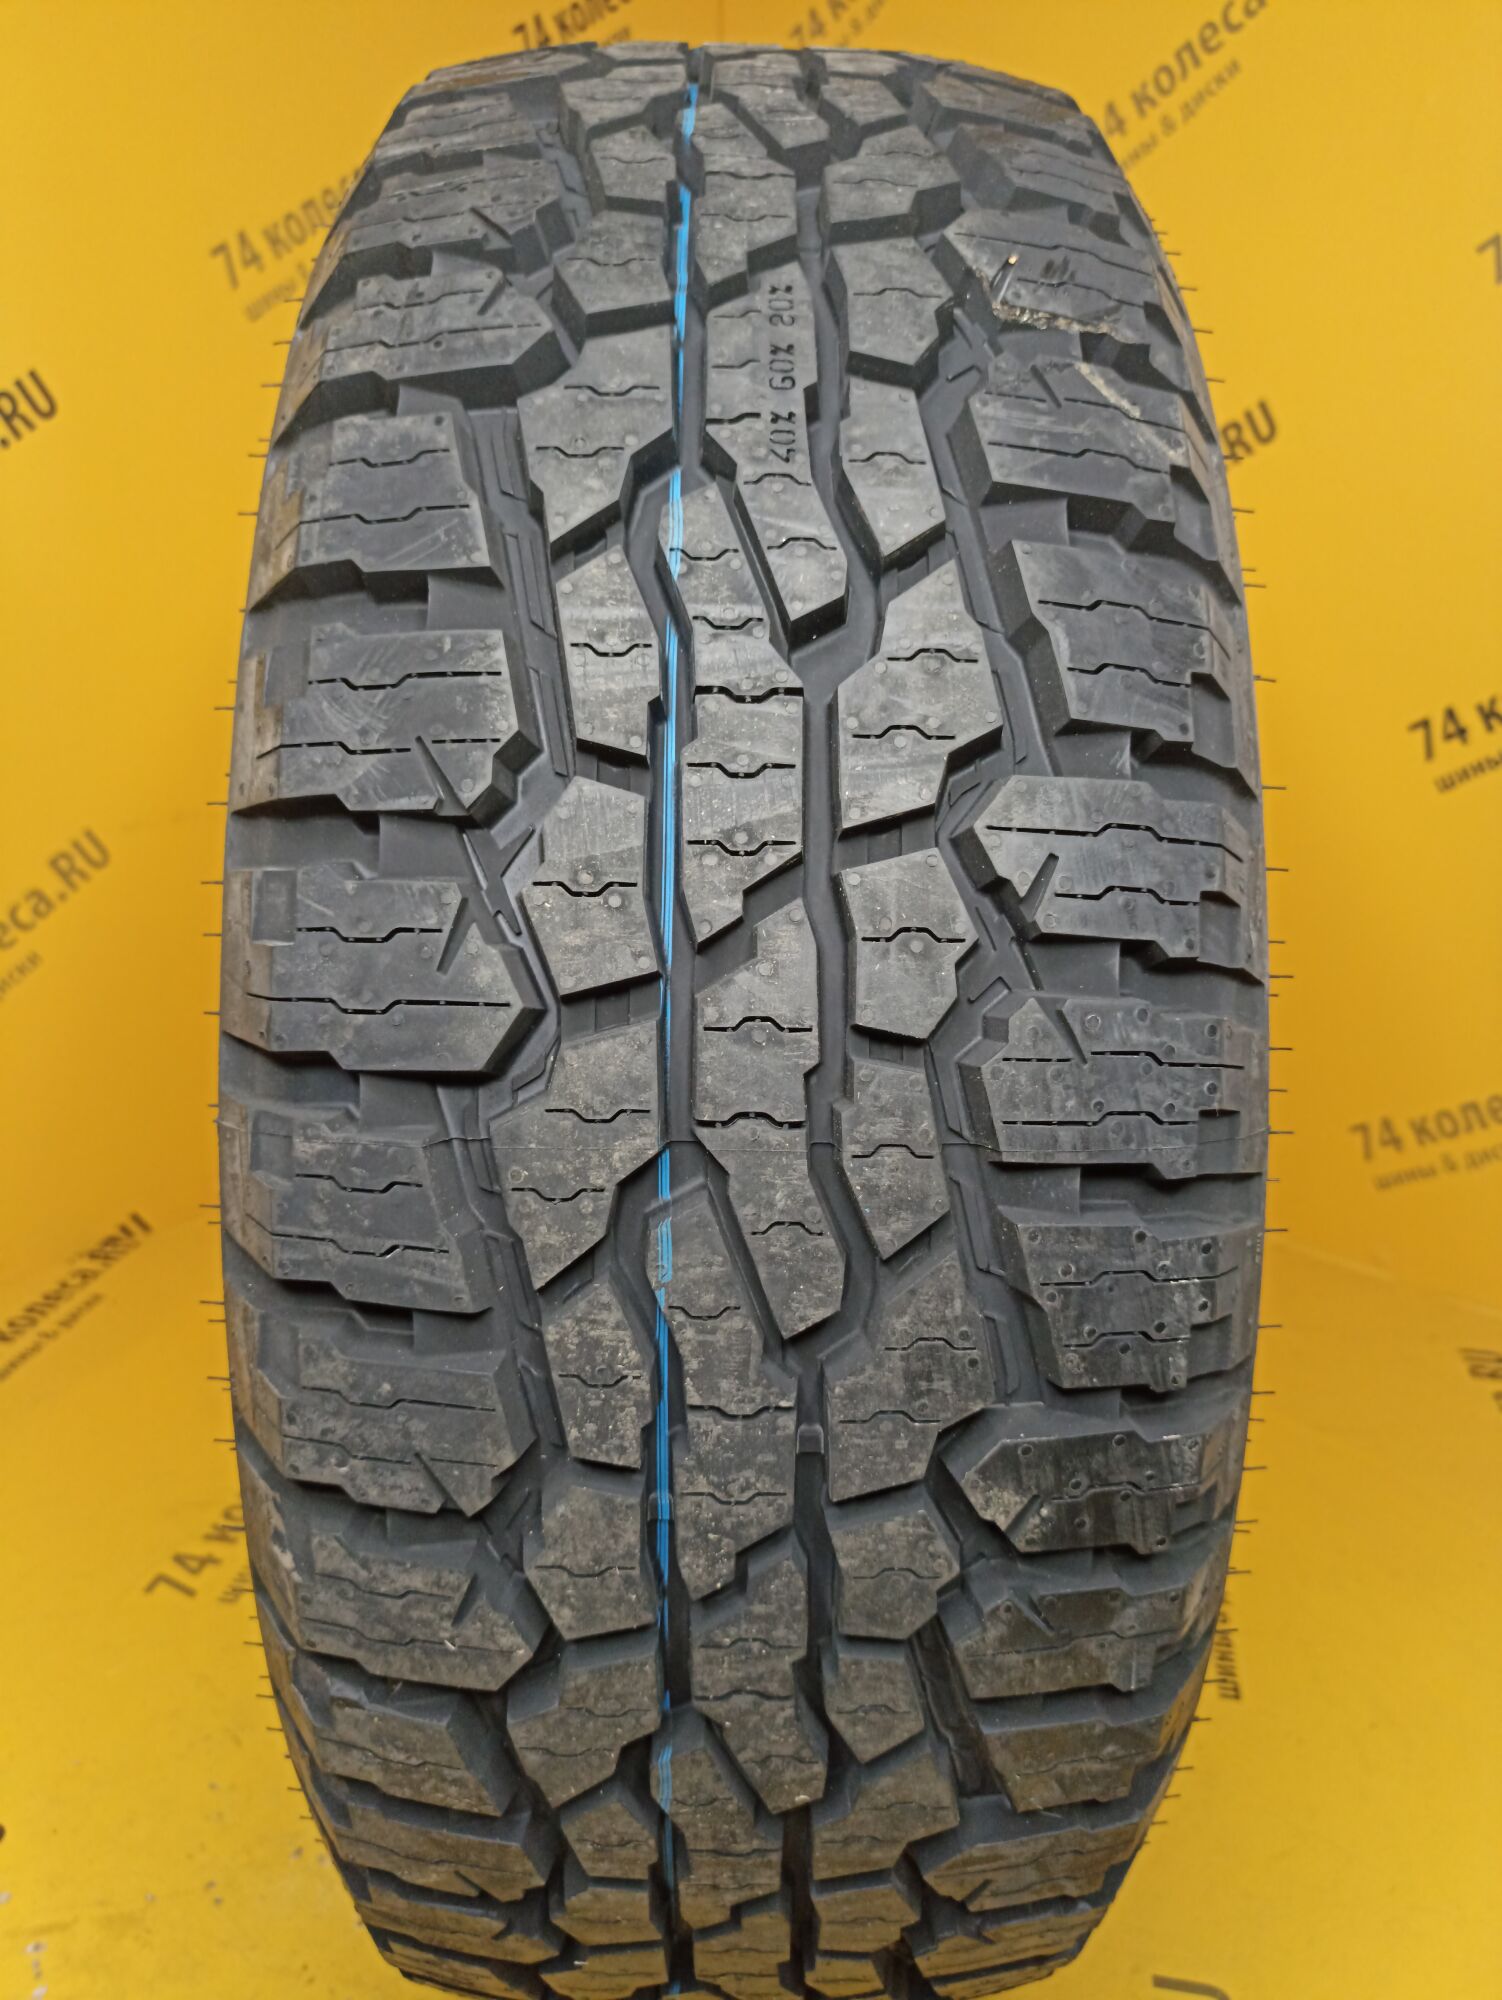 Nokian tyres outpost at 215 65